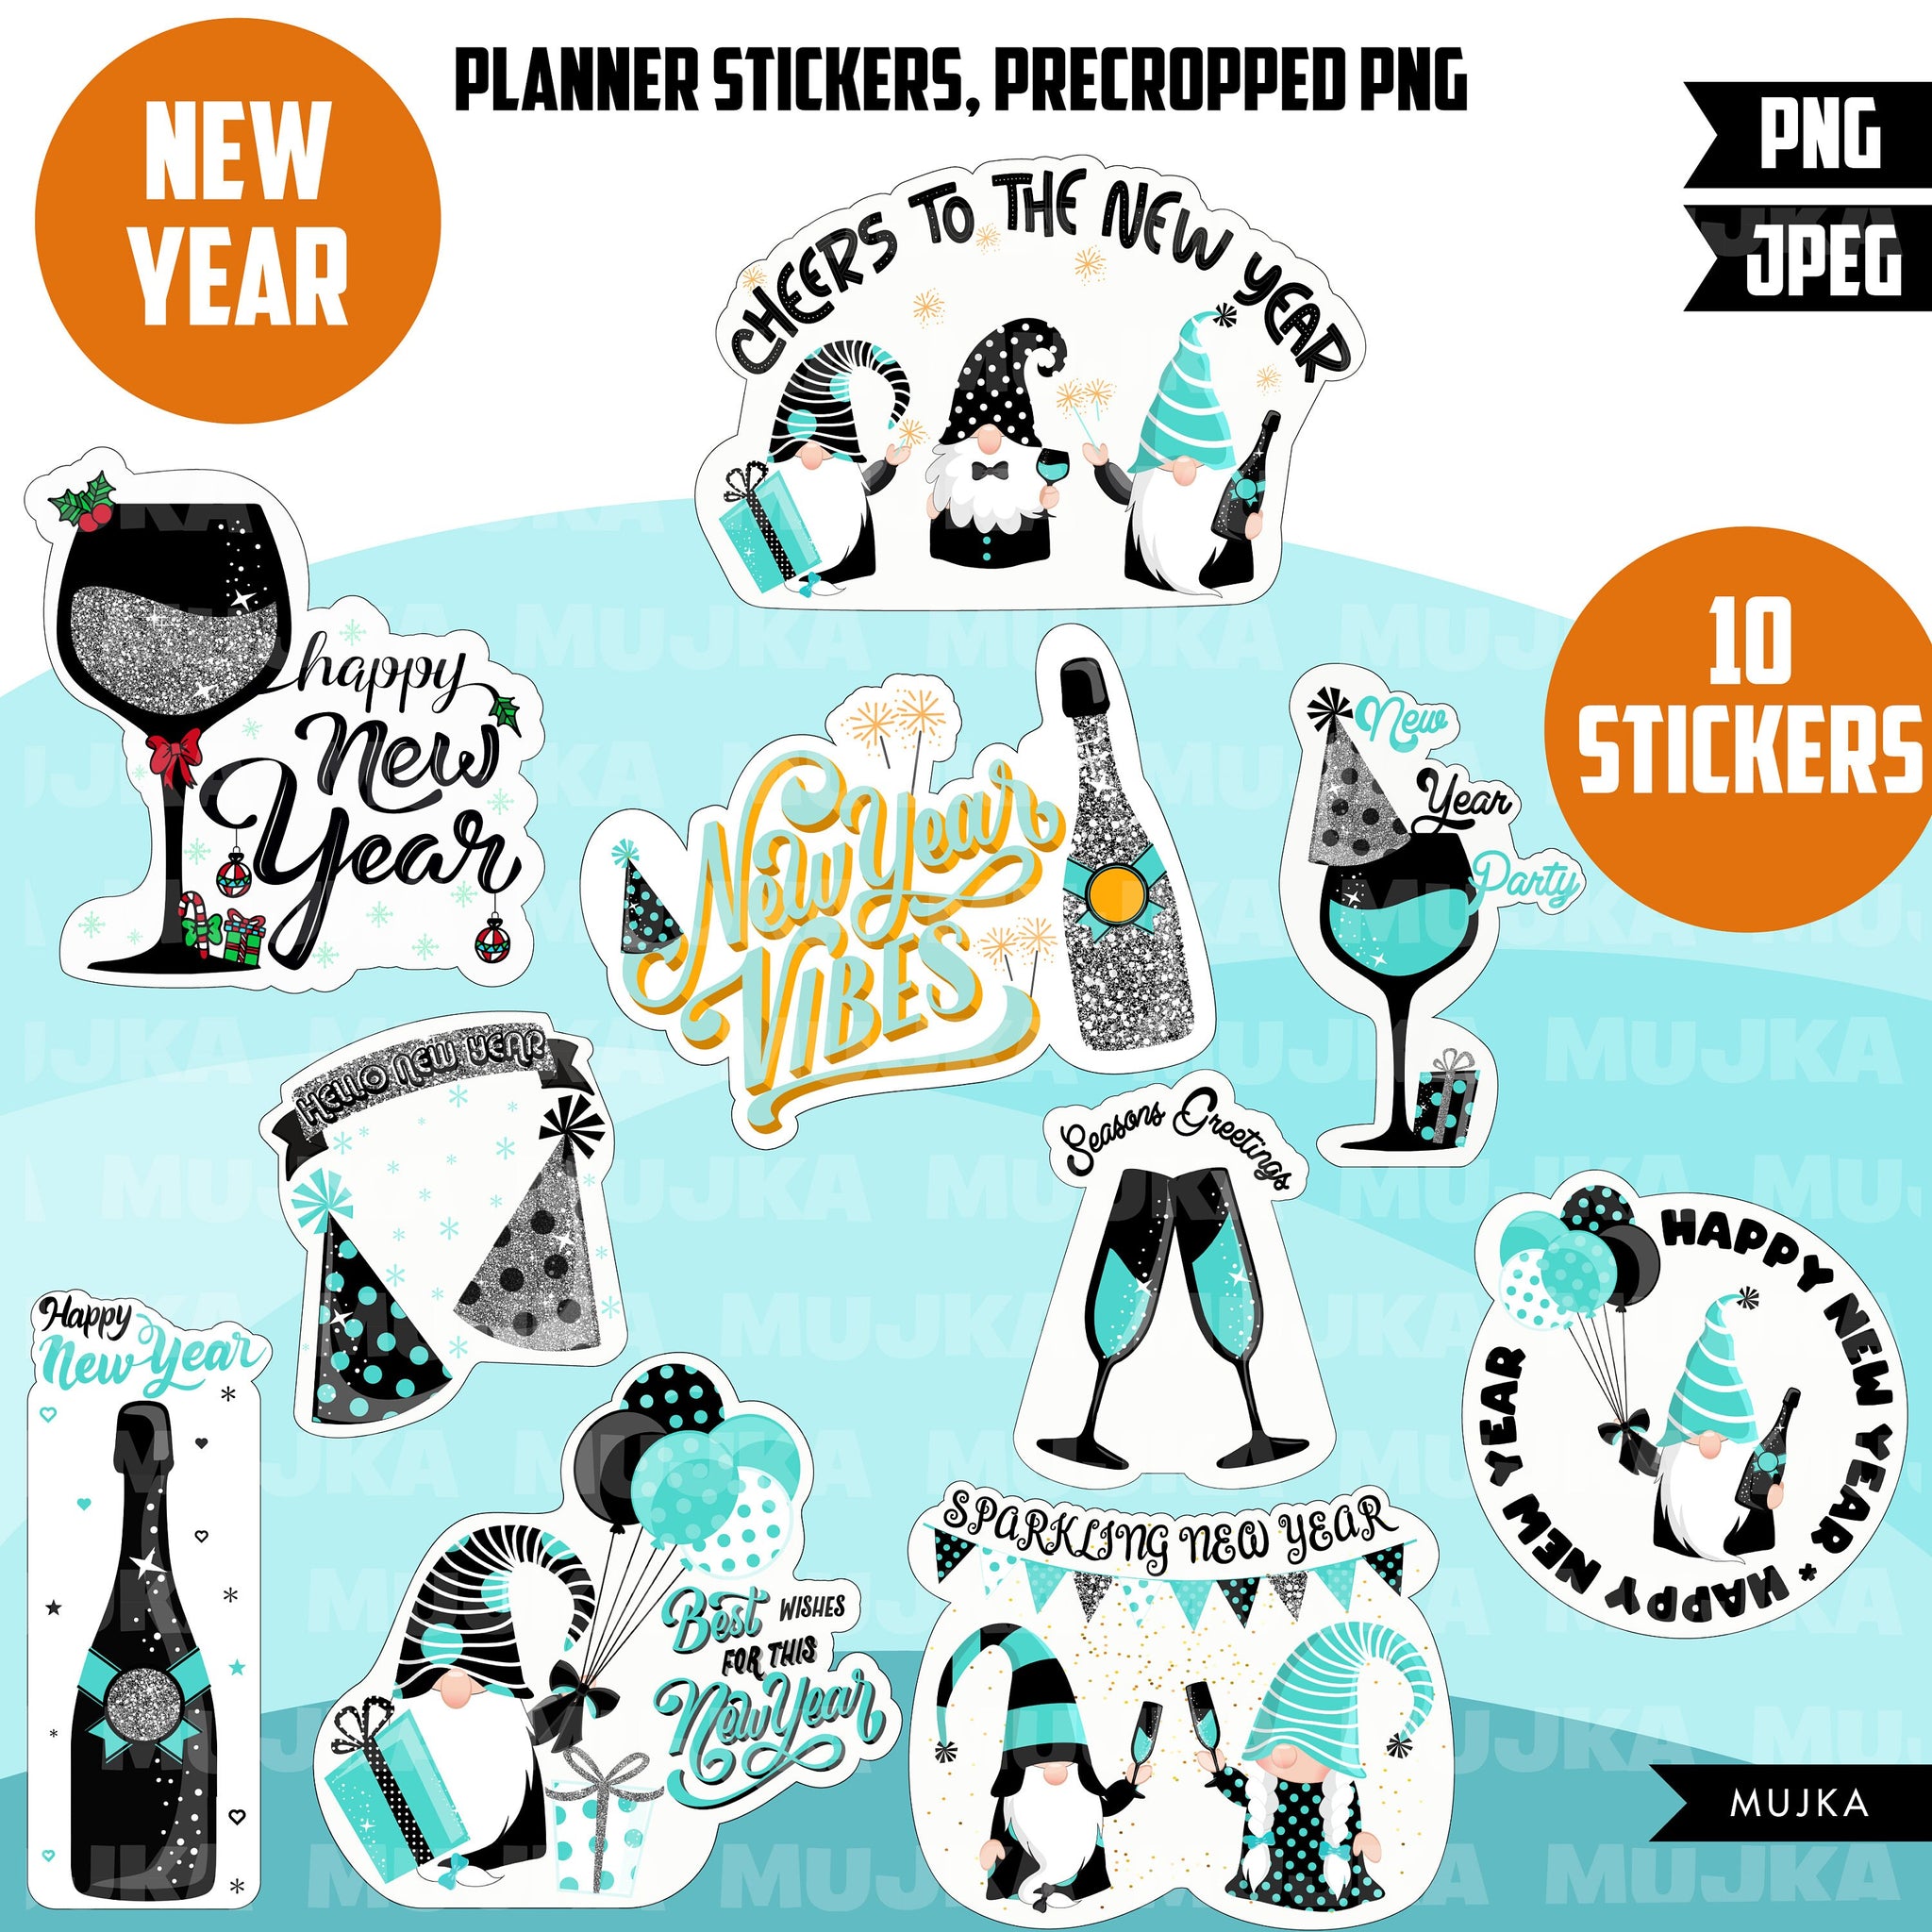 Digital New year stickers, Goodnotes stickers, planner stickers, png precropped stickers, printable  celebration stickers, sublimation png